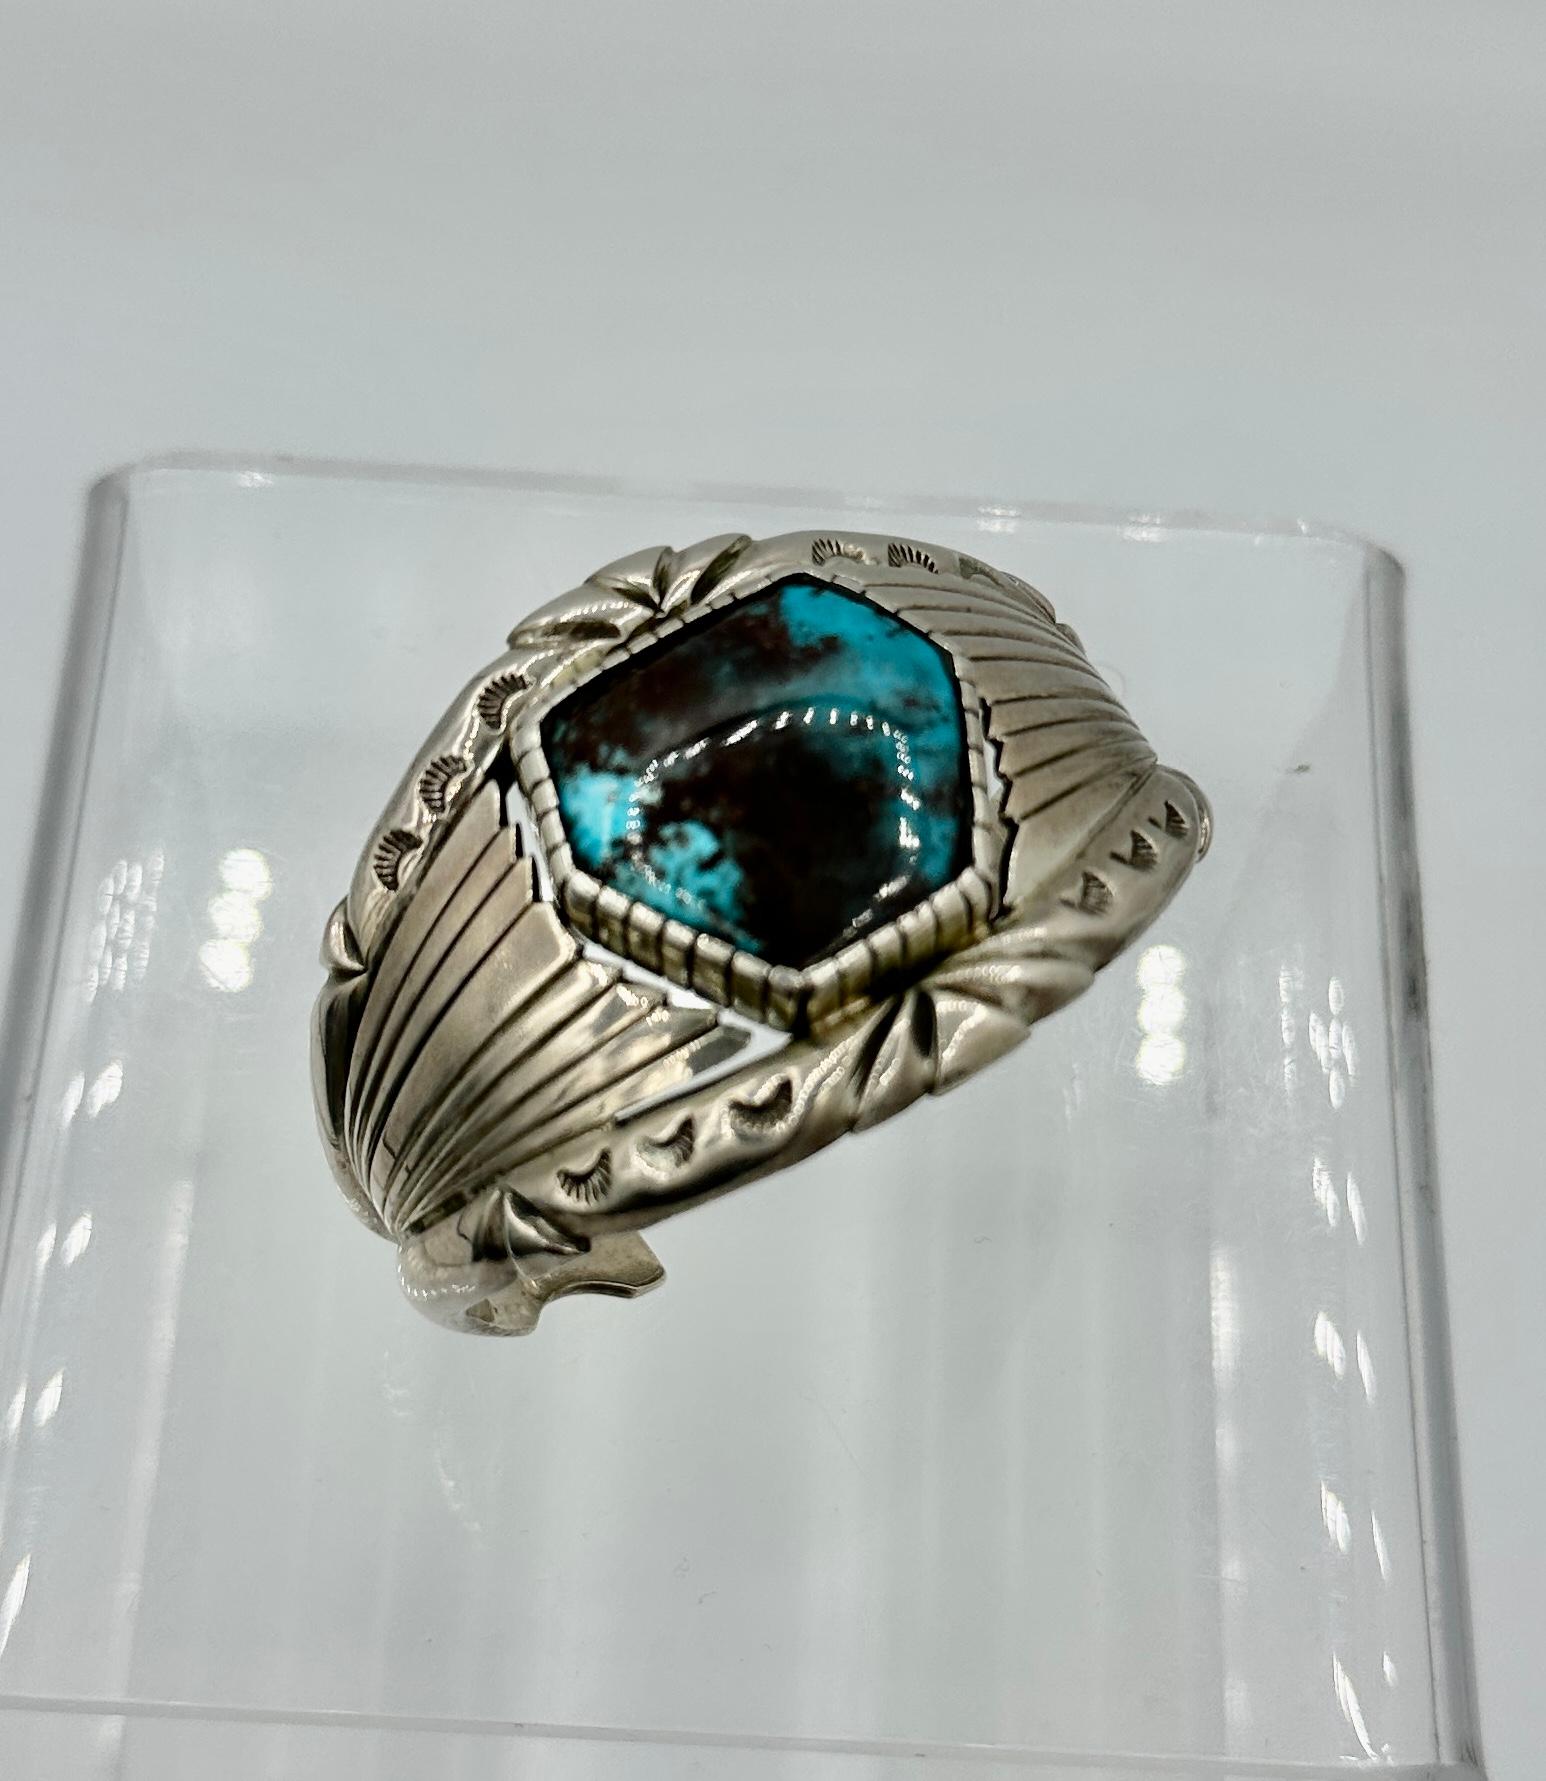 THIS IS A MAGNIFICENT ANDREW ALVAREZ TURQUOISE STERLING SILVER CUFF BRACELET.
This outstanding vintage cuff is from the celebrated artisan Andrew Alvarez whose work is considered to be amongst the finest native jewelry in the world.  Extremely heavy